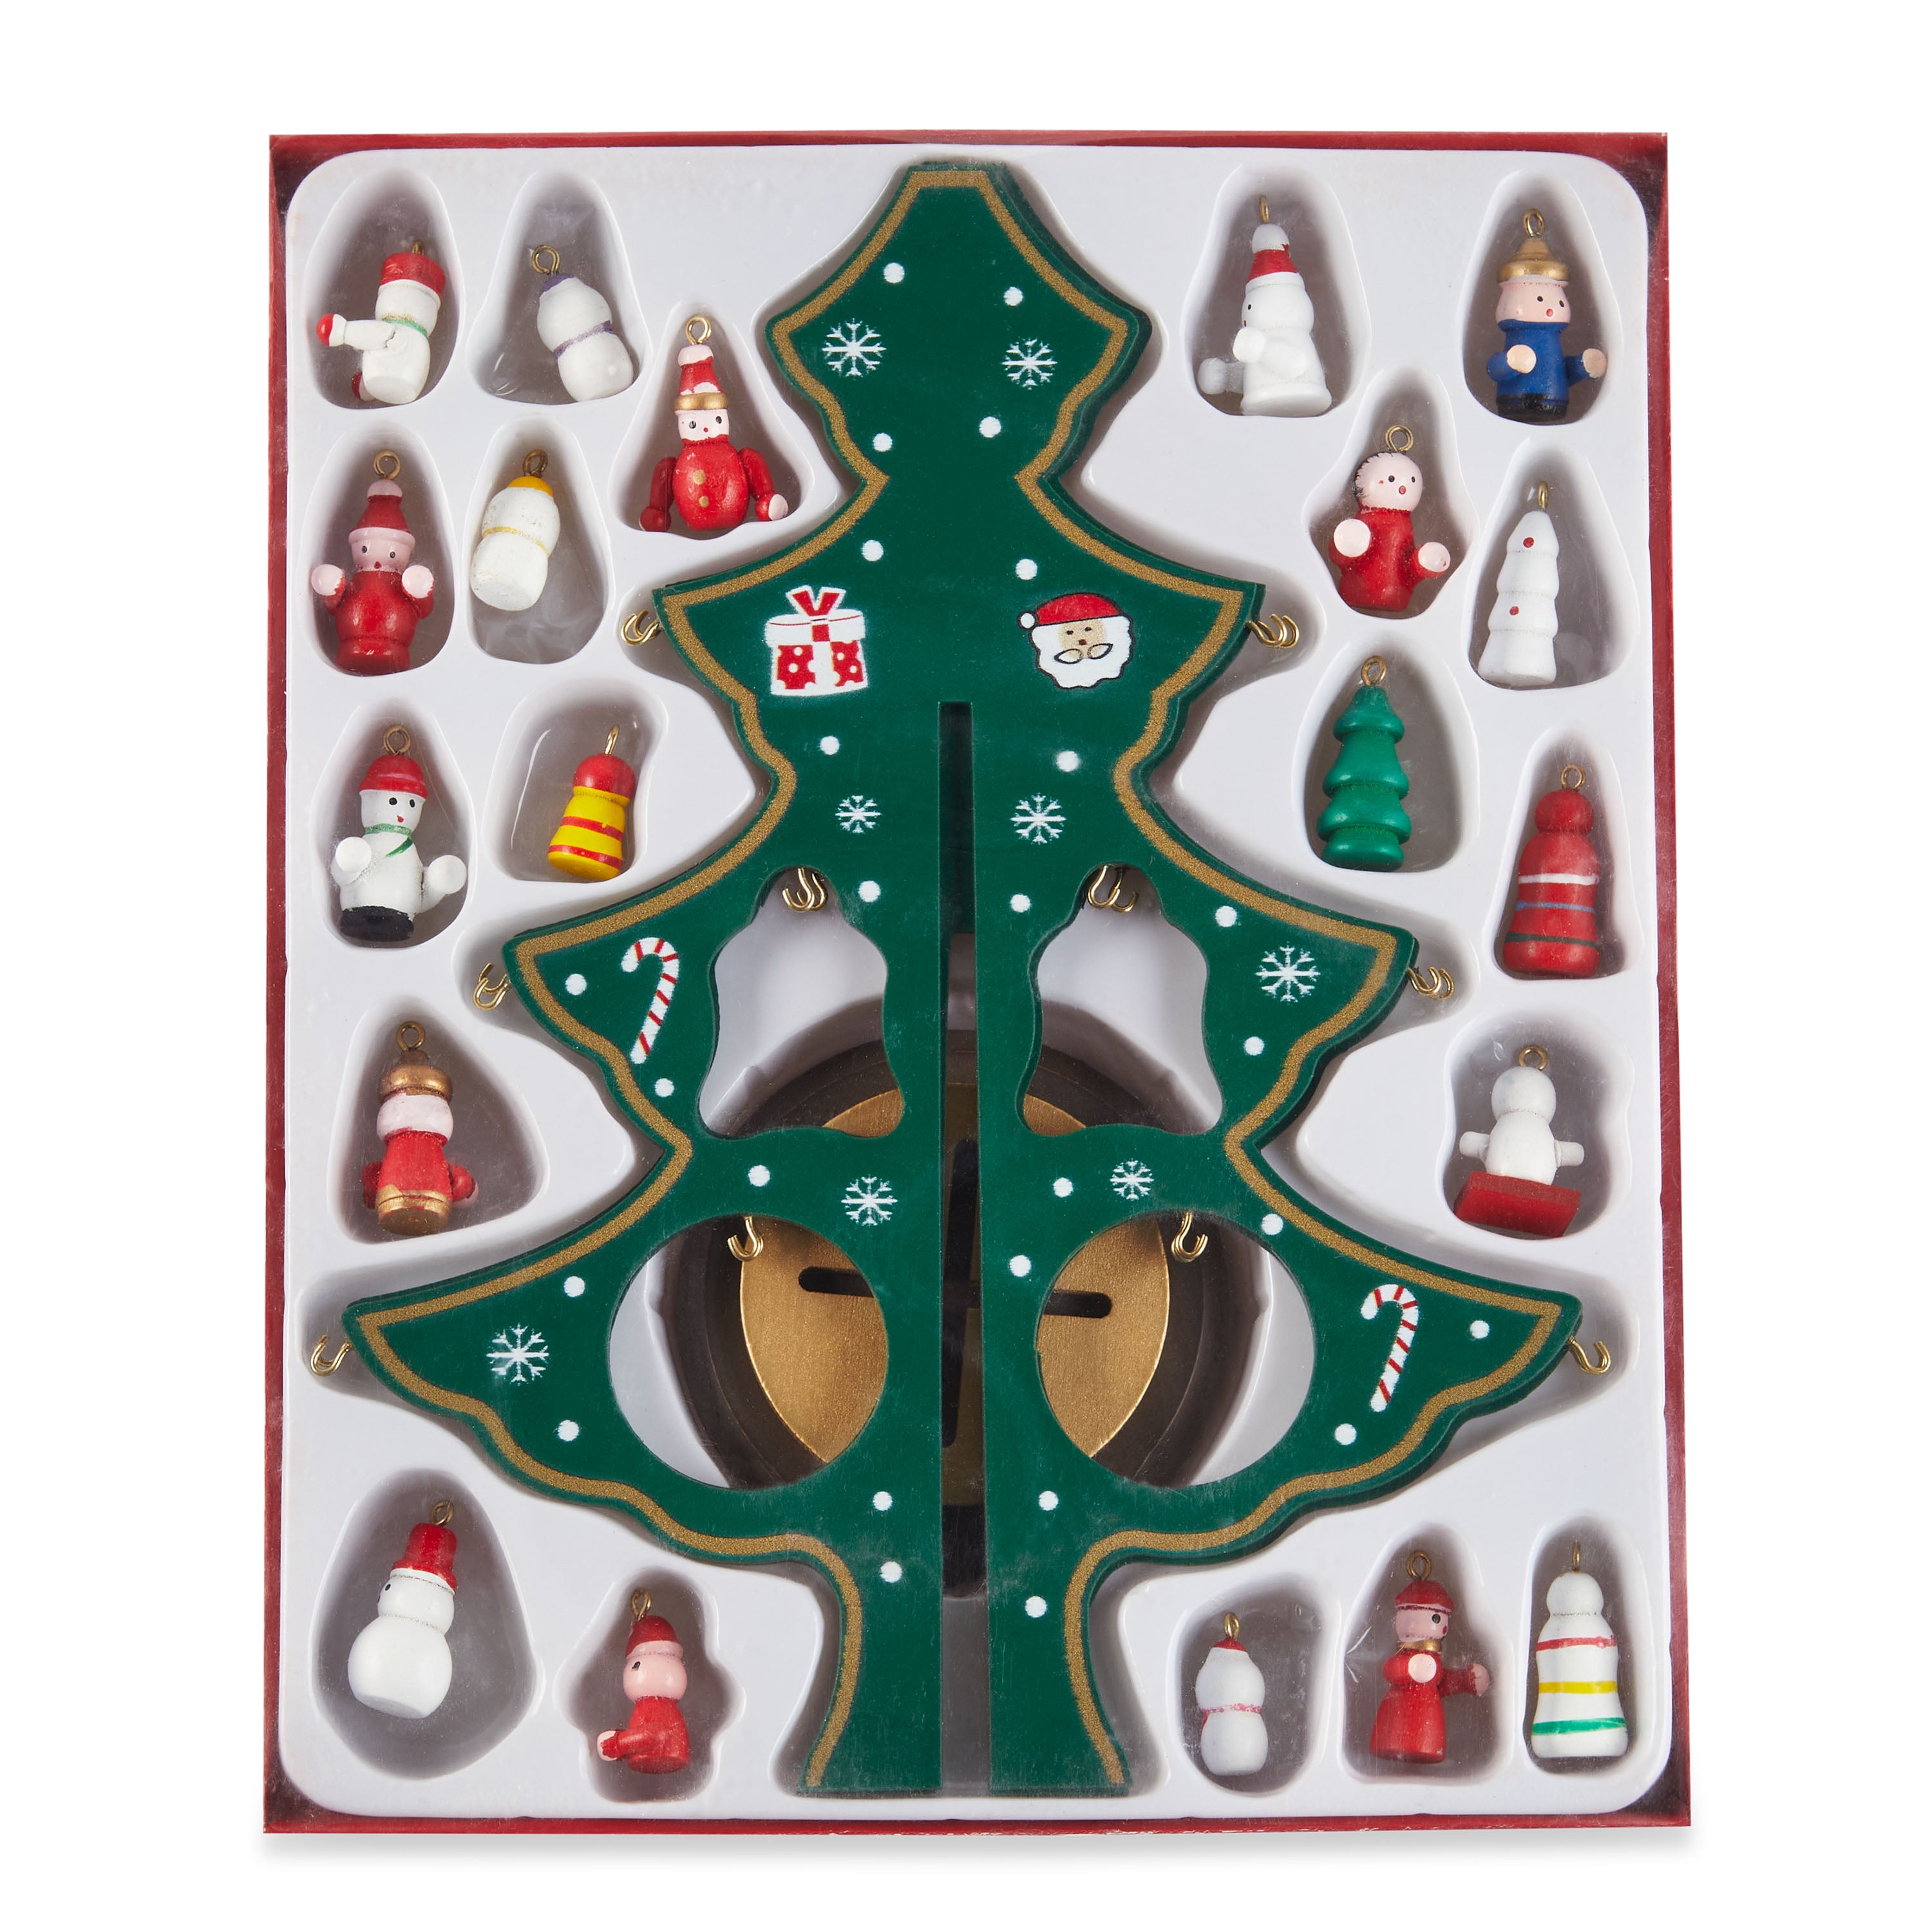 Holiday Time 20-Piece Green Wood Mini Christmas Tree Set, Assembled Tree Size, 9” High